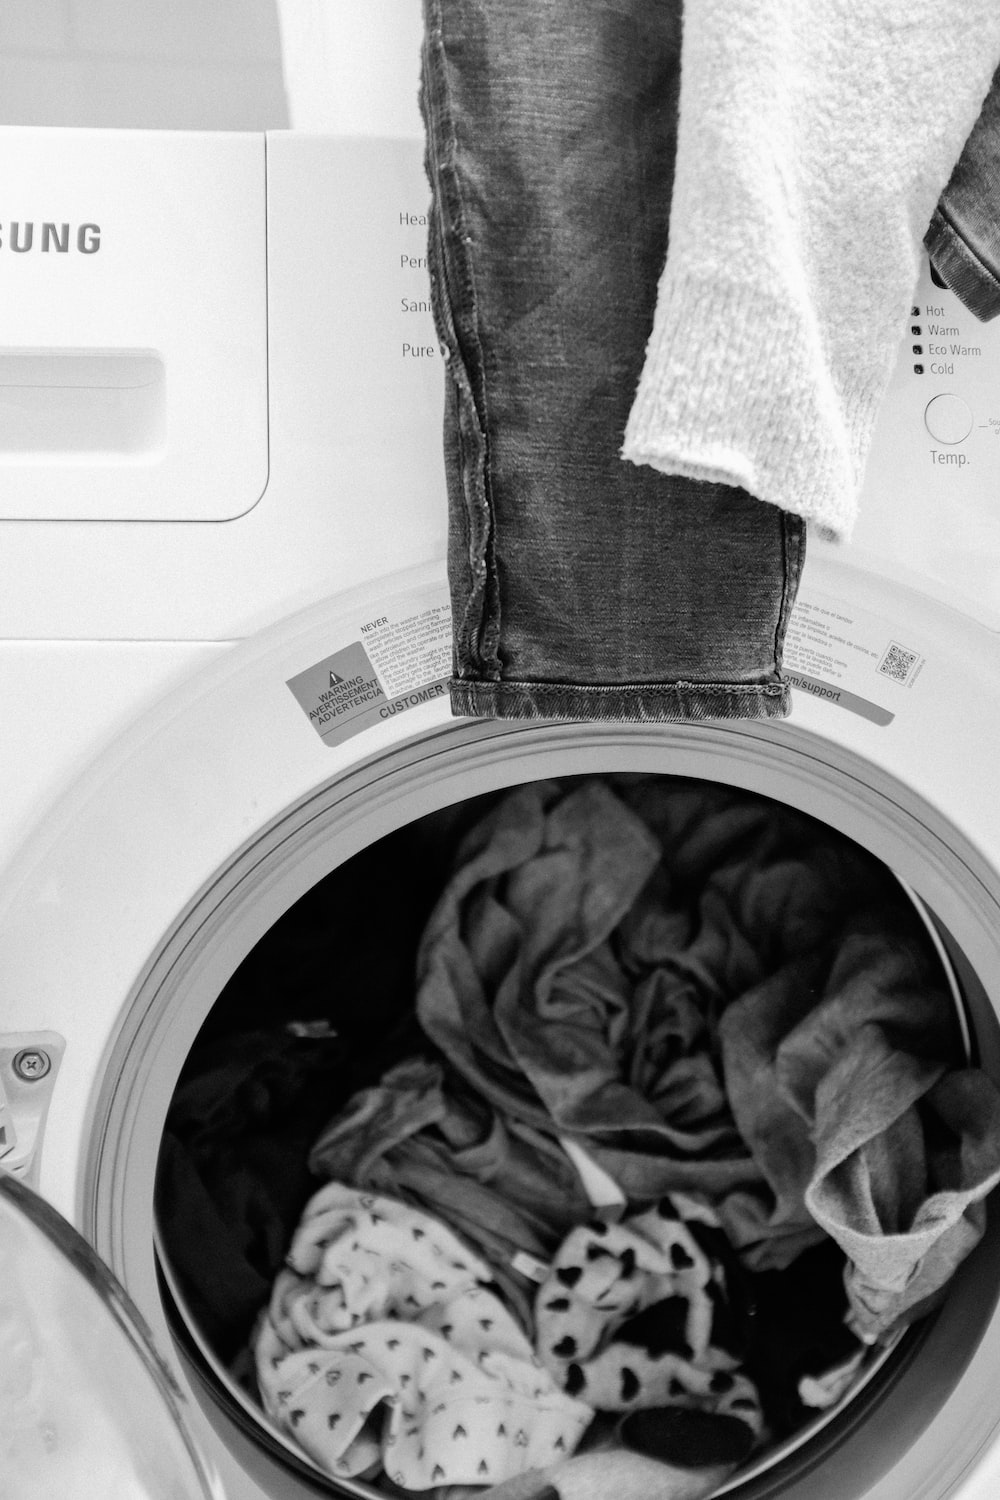 What setting to wash dark clothes?